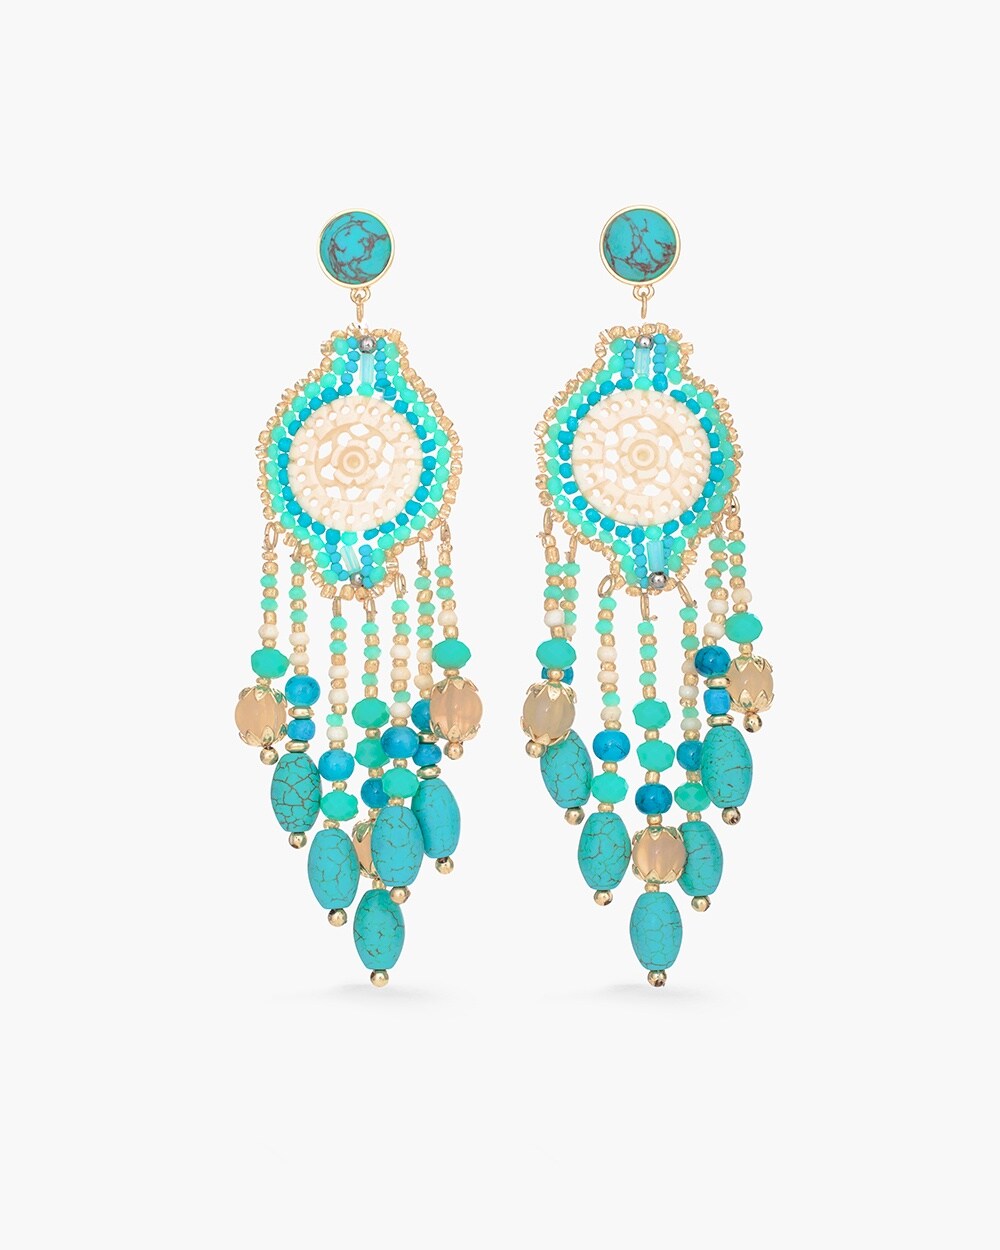 Beaded Turquoise and Neutral Chandelier Earrings